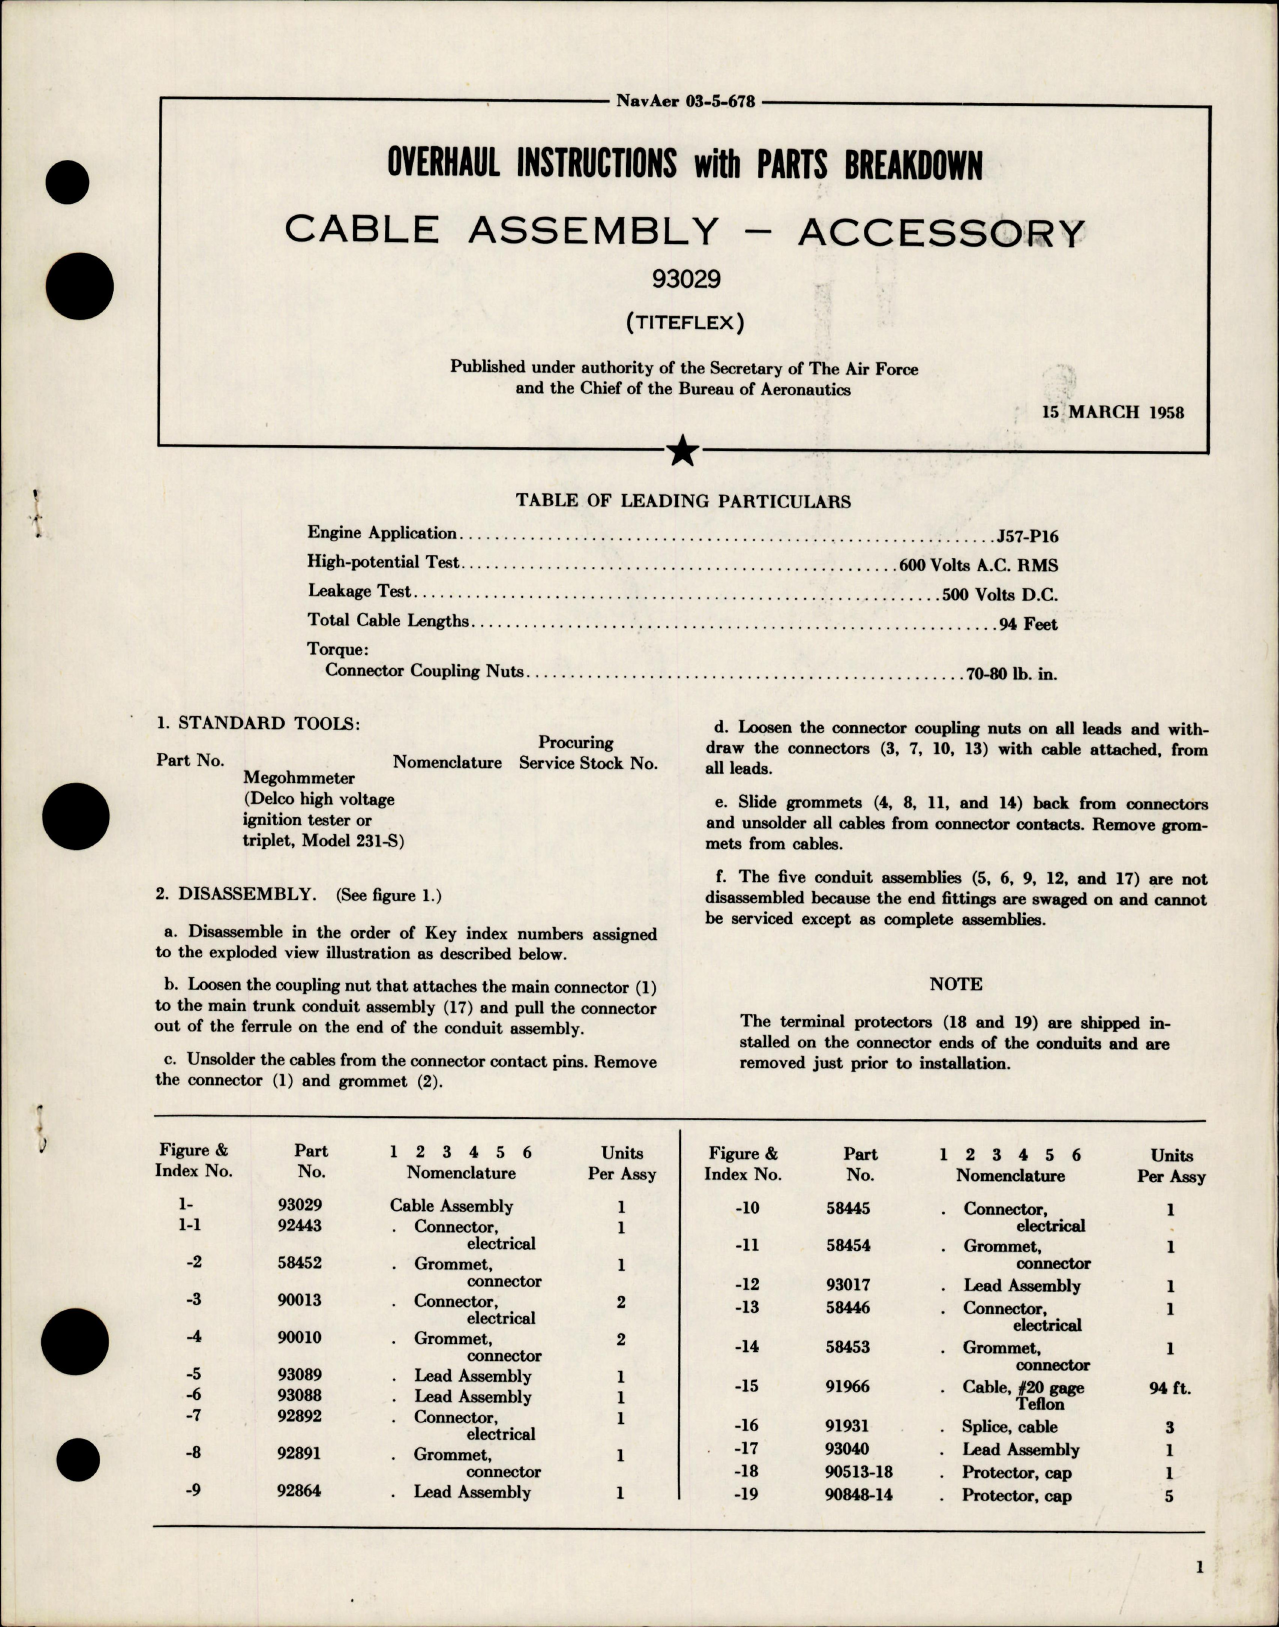 Sample page 1 from AirCorps Library document: Overhaul Instructions with Parts Breakdown for Cable Assembly Accessory - 93029 